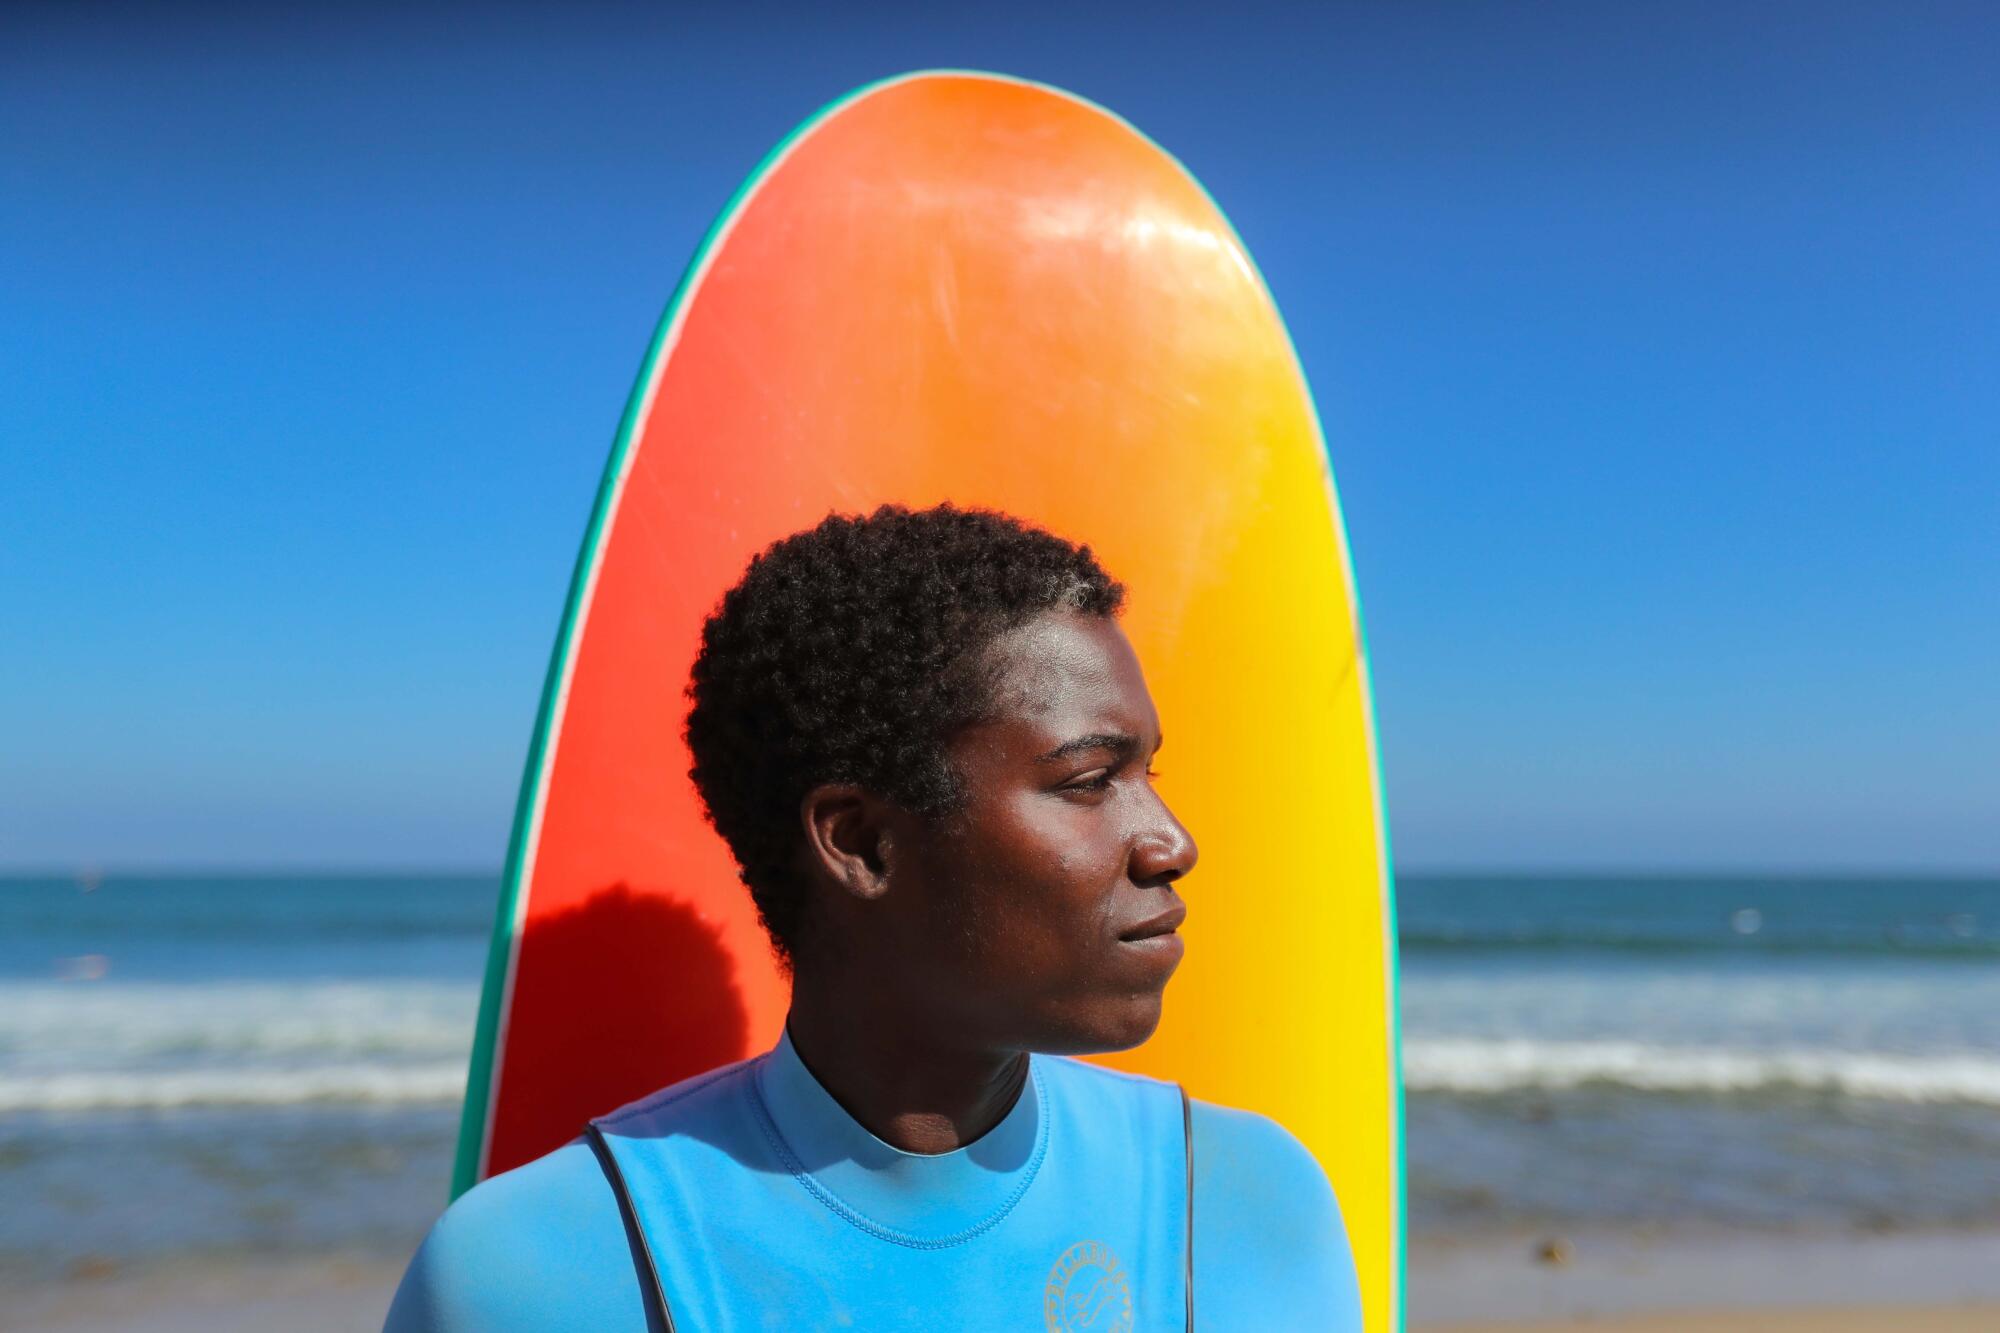 A person poses in front of a surfboard and the ocean.